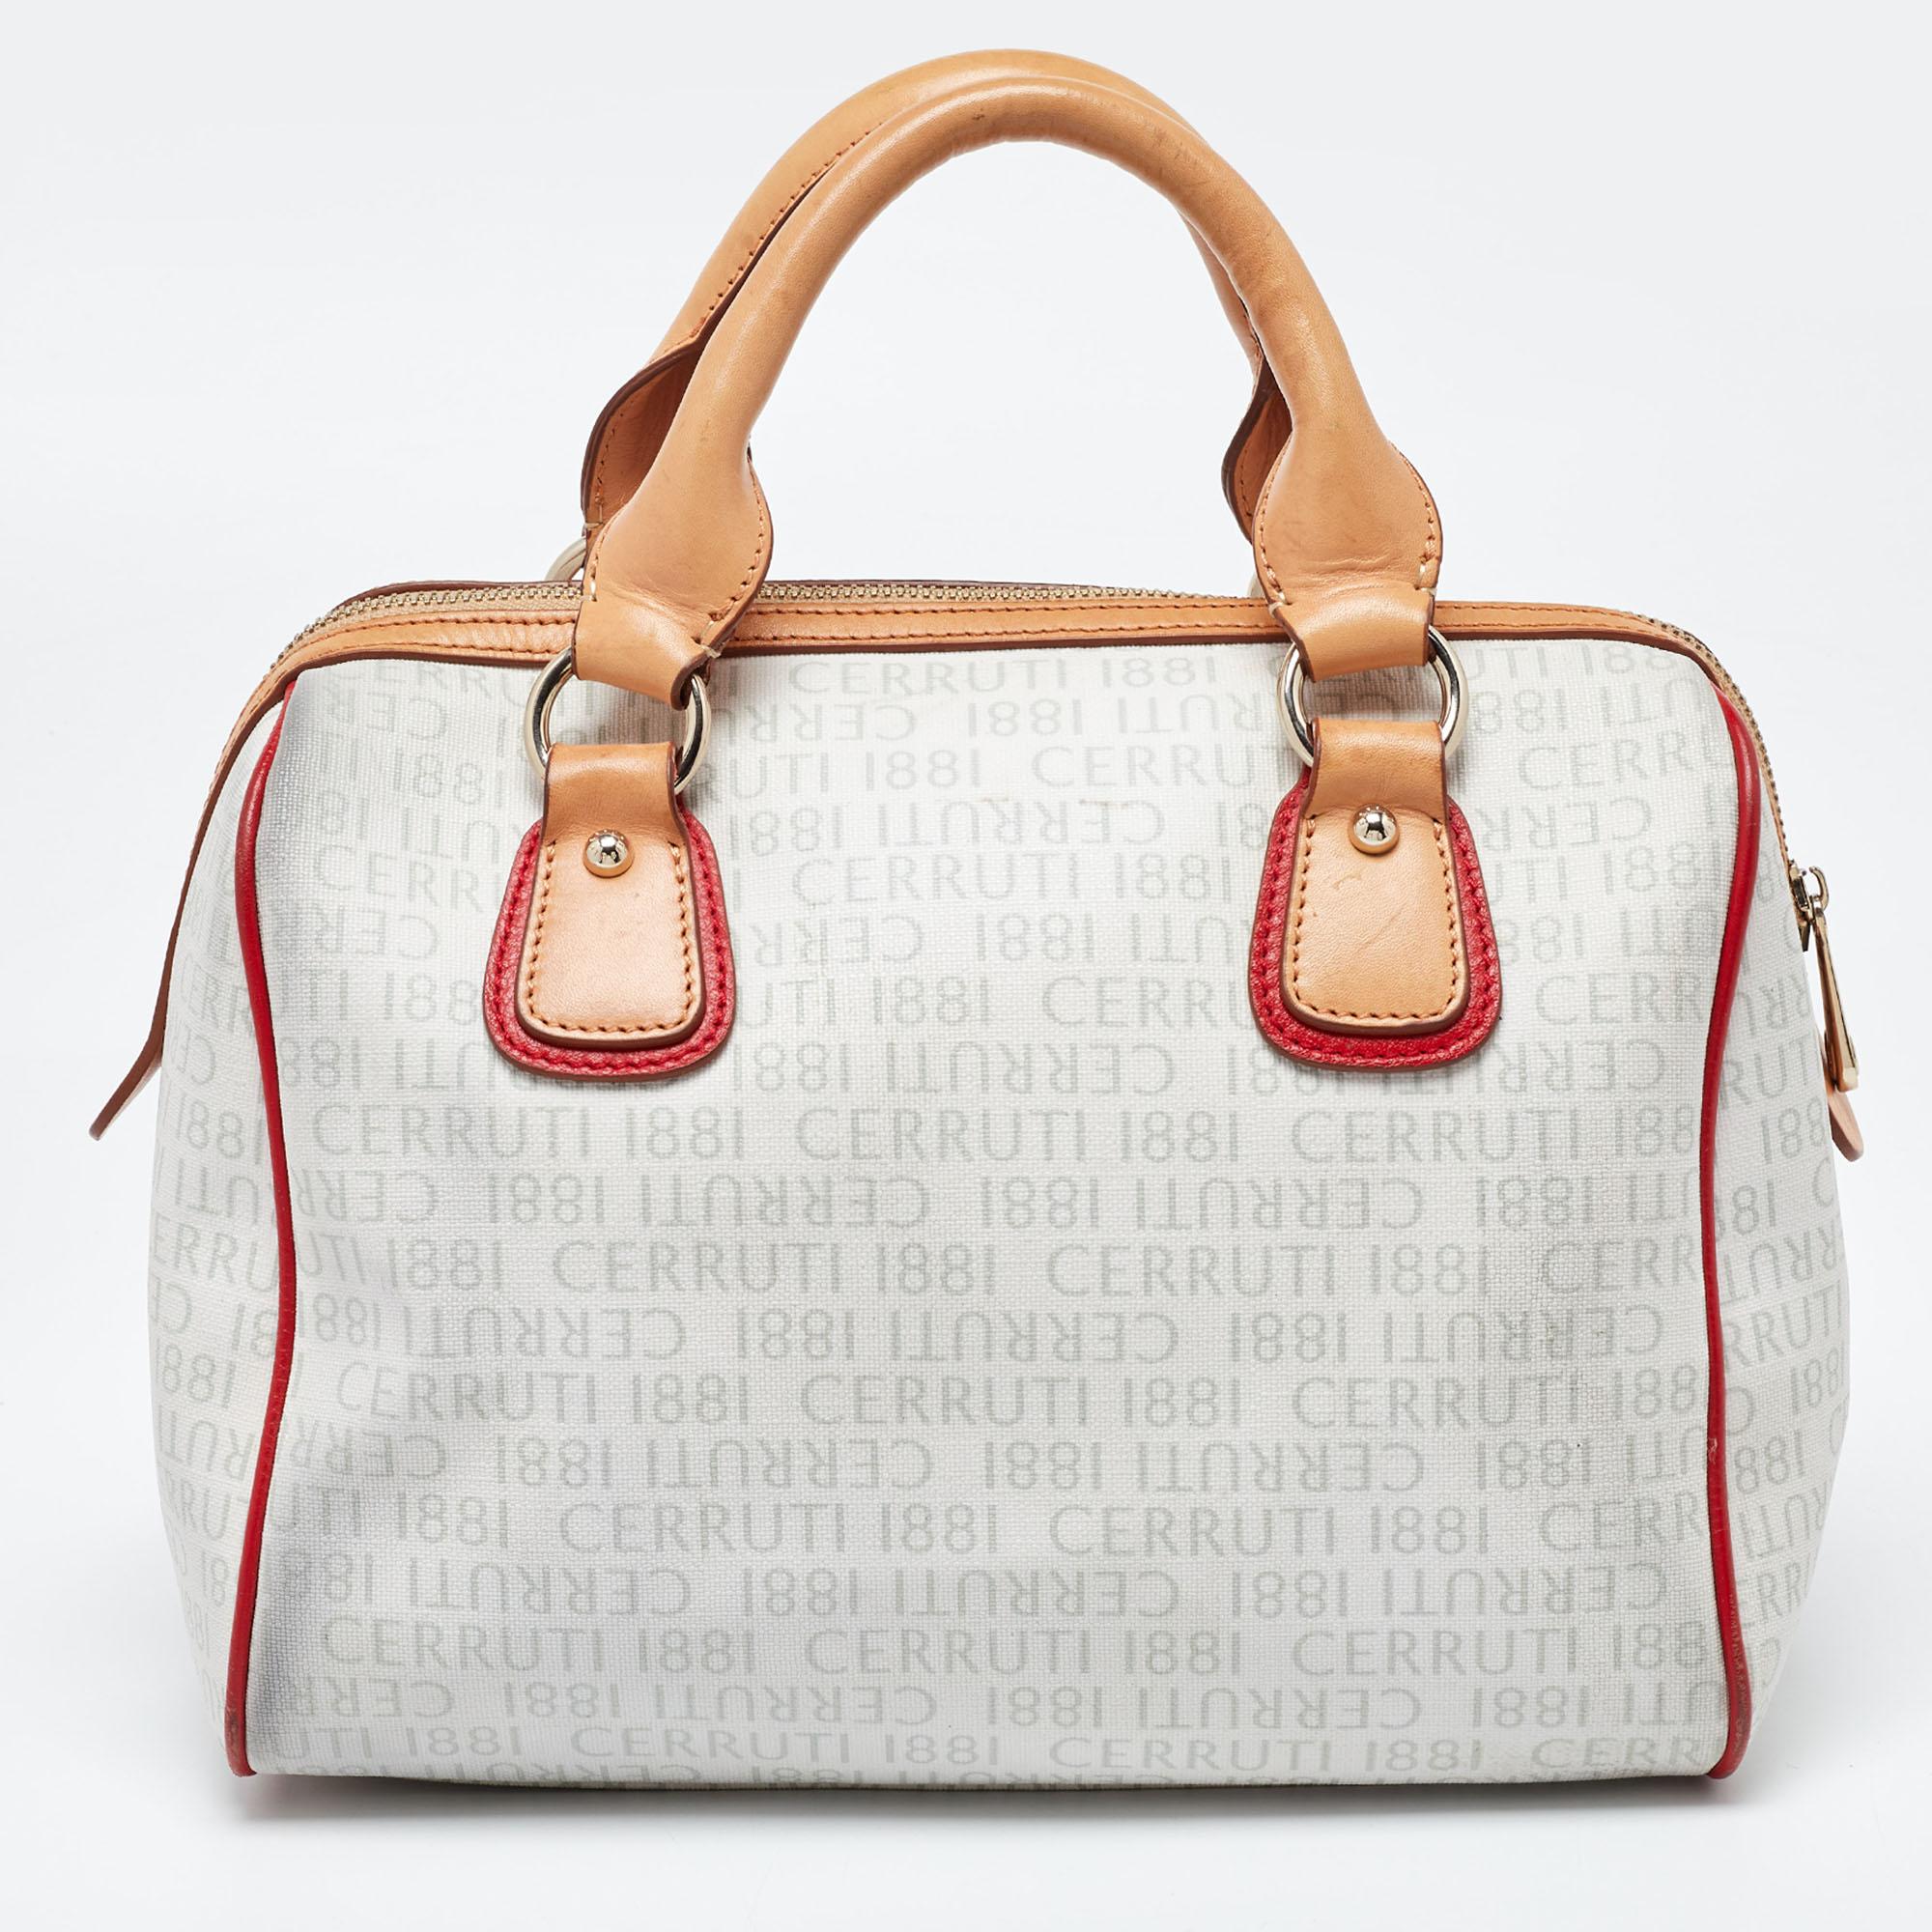 Thoughtful details, high quality, and everyday convenience mark this designer bag for women by Cerruti. The bag is sewn with skill to deliver a refined look and an impeccable finish.

